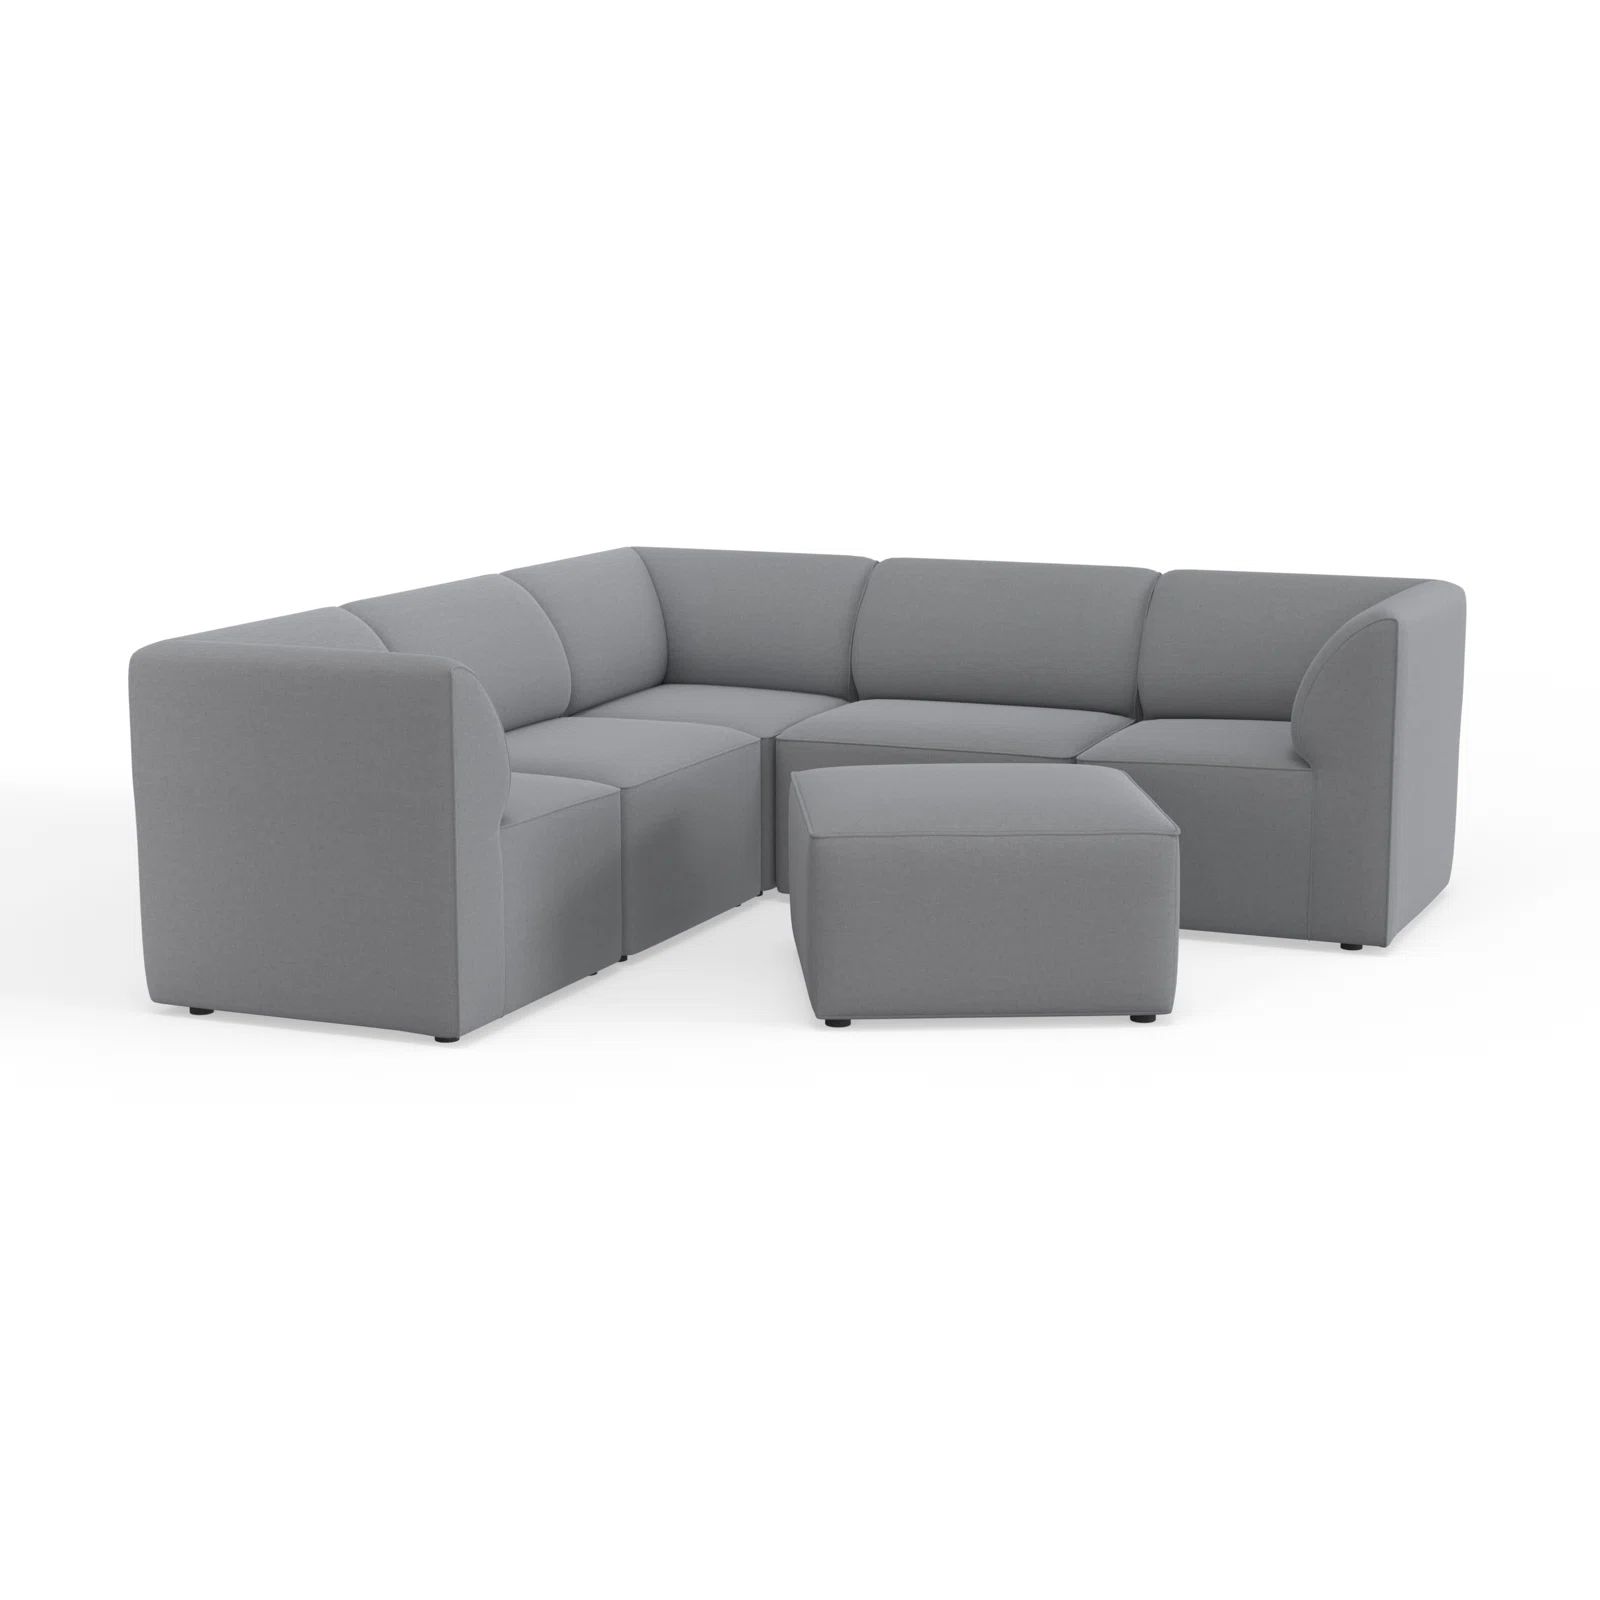 Sinkler 92.5'' Wide Outdoor Symmetrical Patio Sectional with Cushions | Wayfair North America